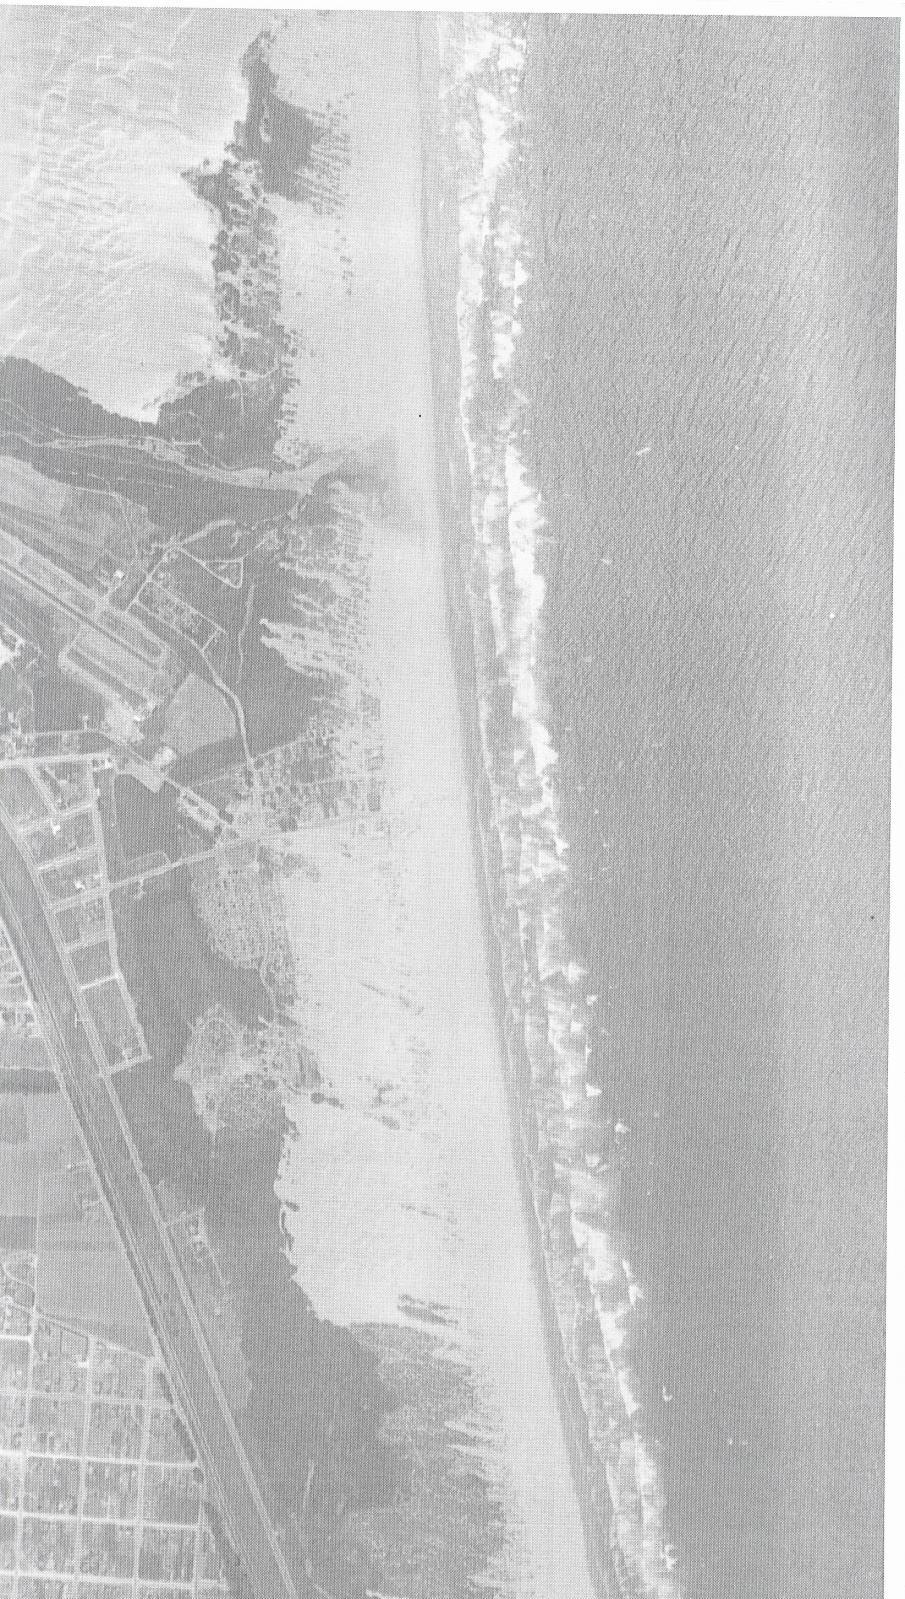 The following aerial photo was taken in 1956. If one looks closely at the photo to the left, one will clearly see the Oceano Airport and Pier Avenue.